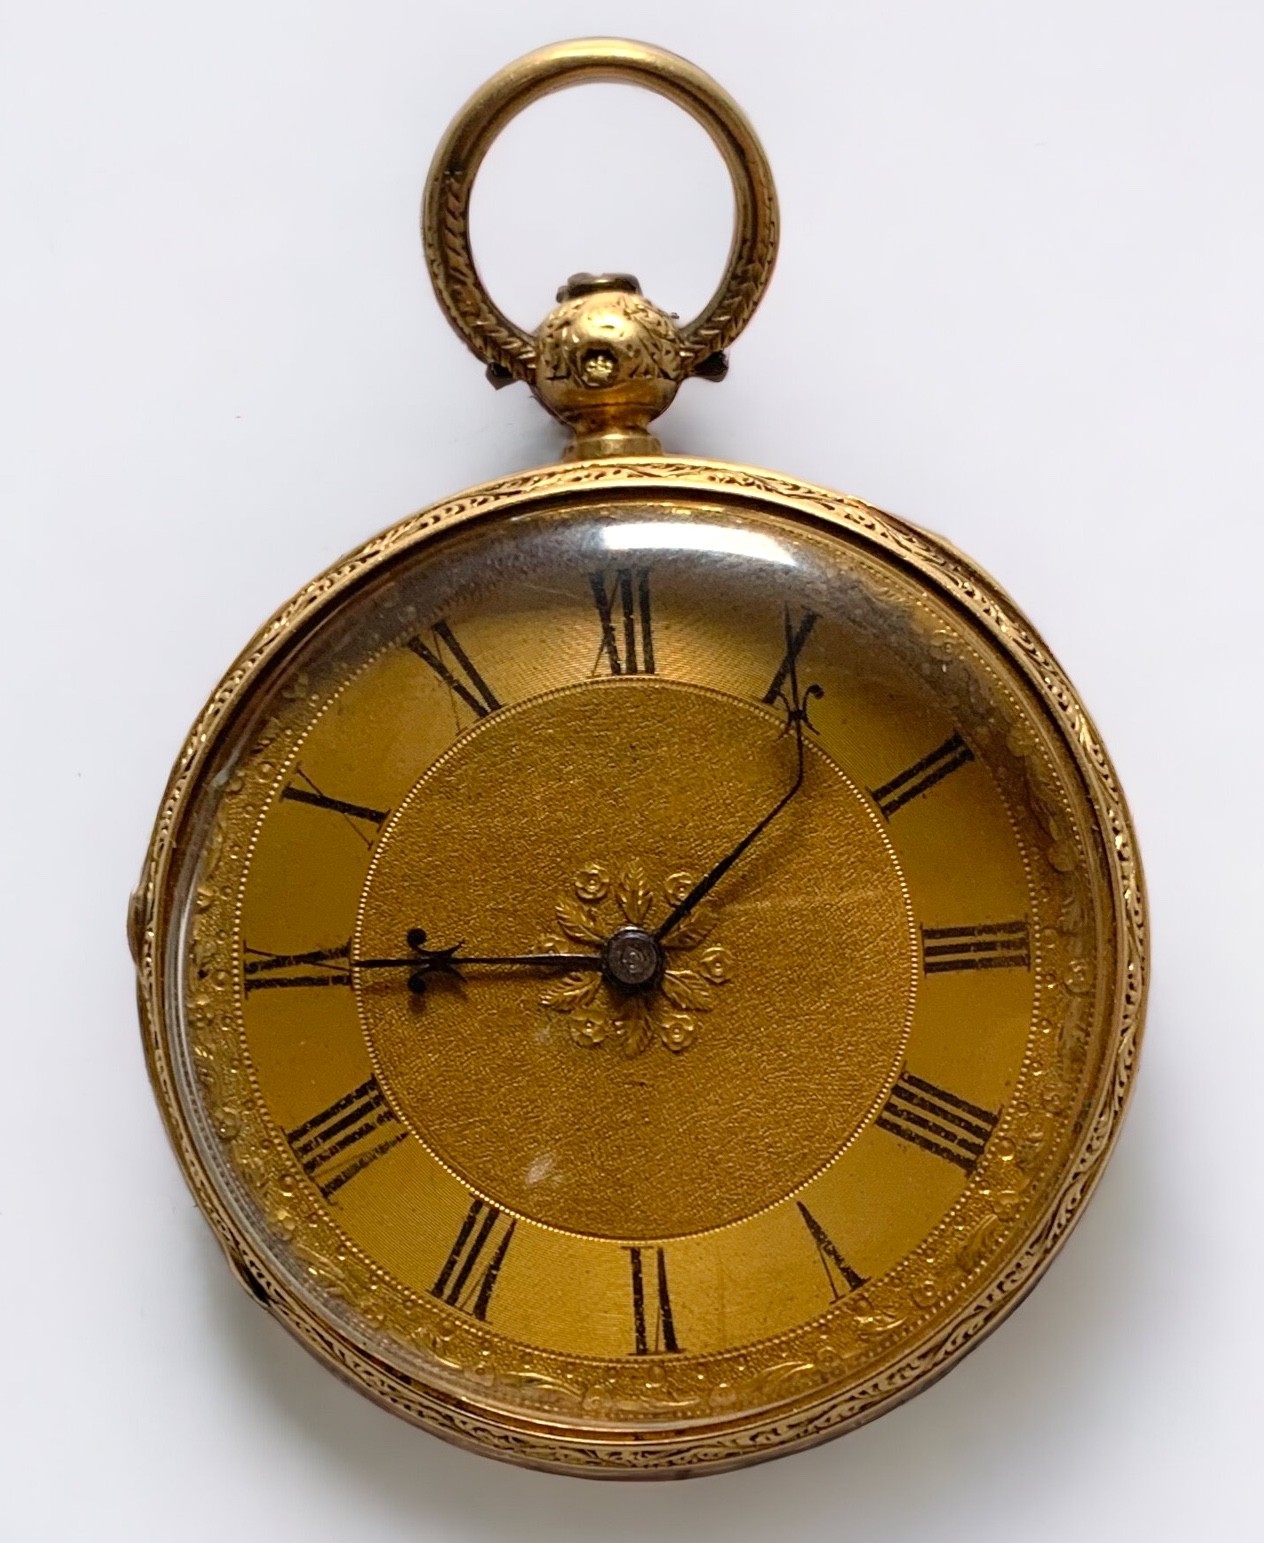 An 18ct gold cased open-face pocket watch, the gilt dial with Roman numerals denoting hours, the